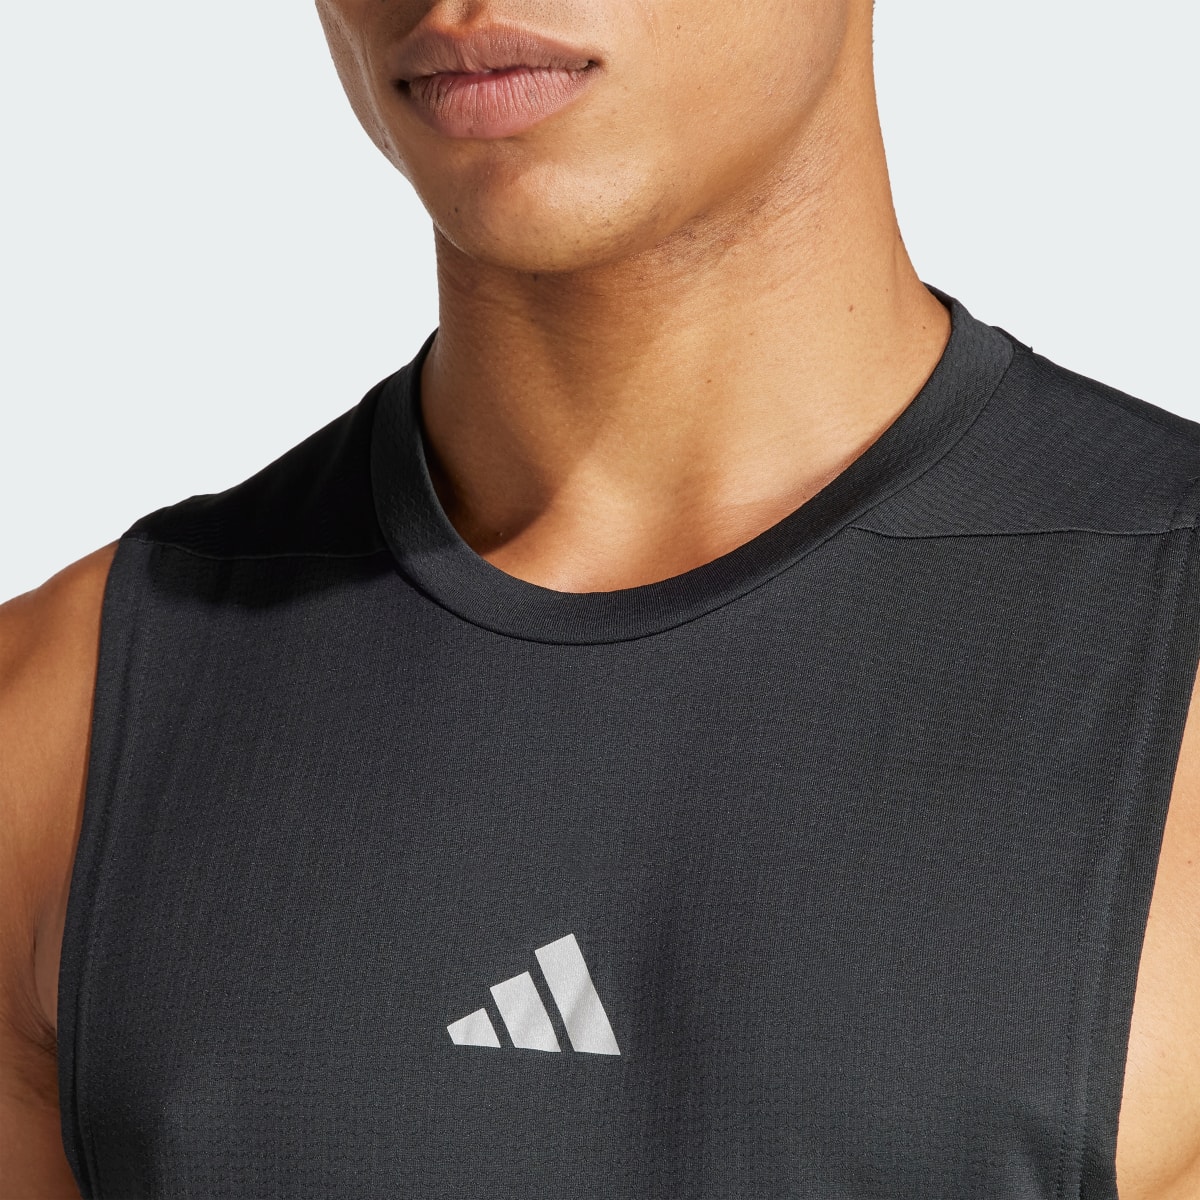 Adidas Designed for Training Workout HEAT.RDY Tank Top. 6